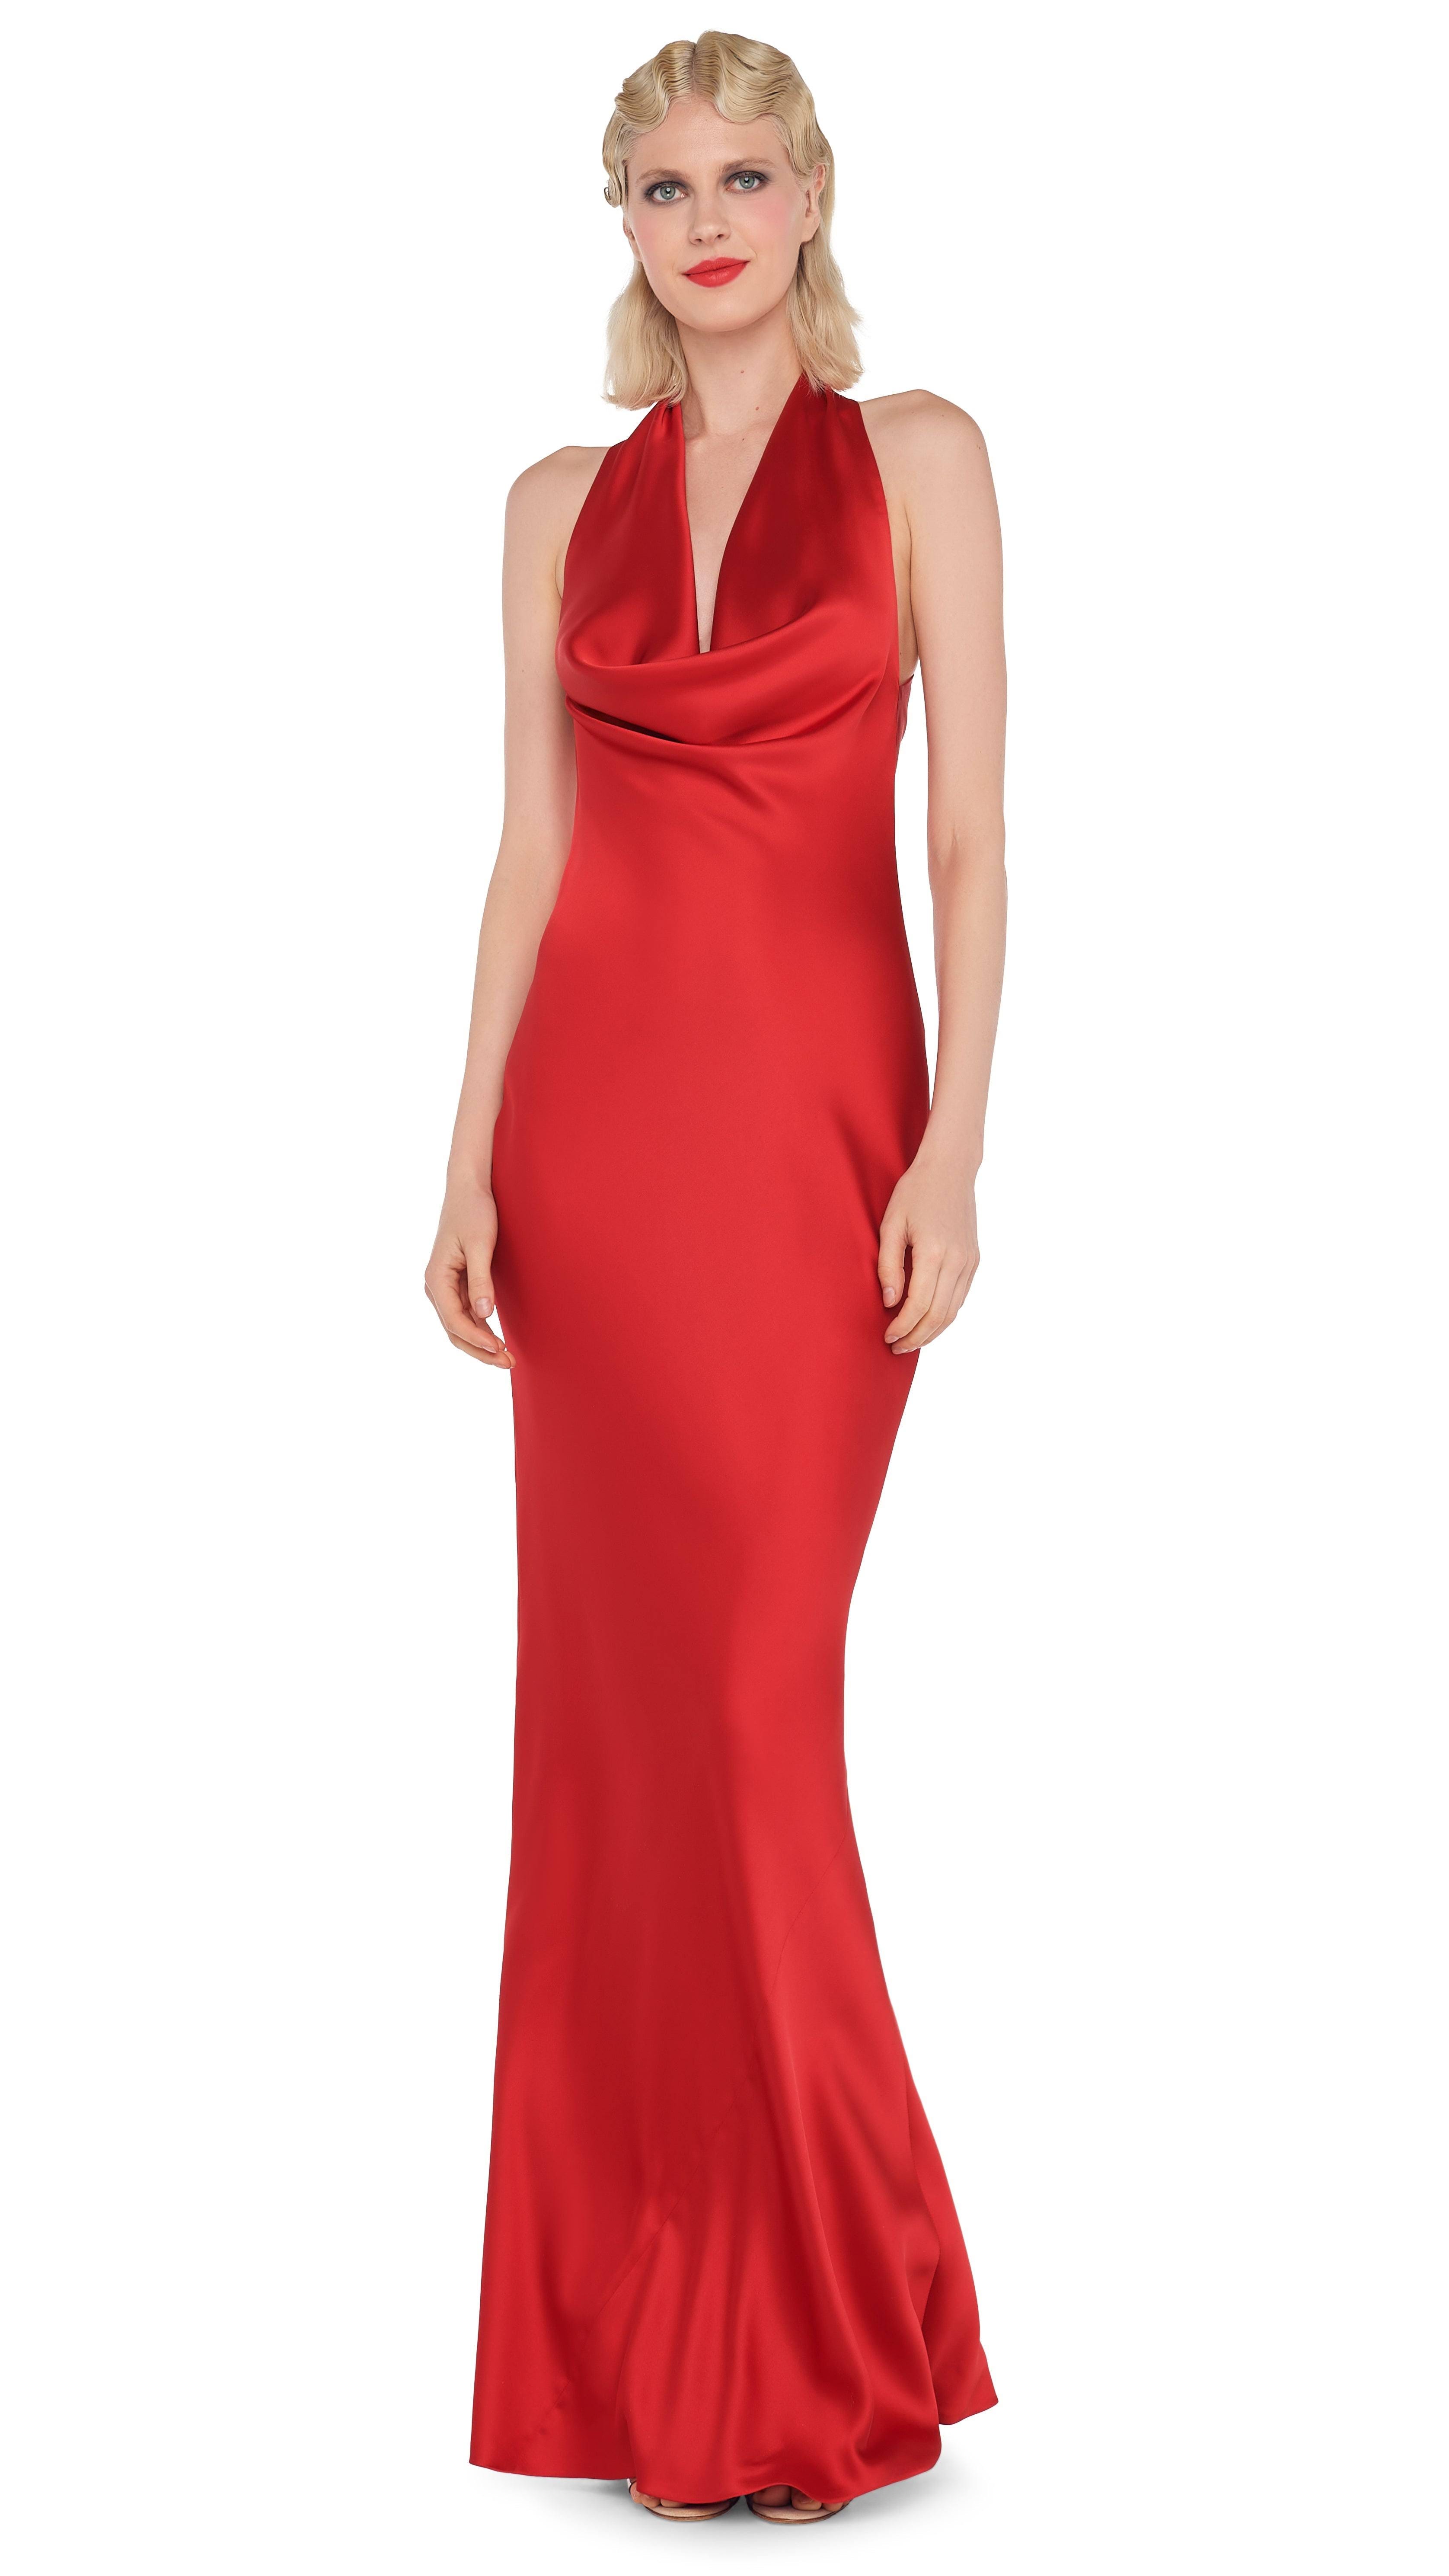 Tiger Red Satin Cowl-Neck Gown by Norma Kamali | Image